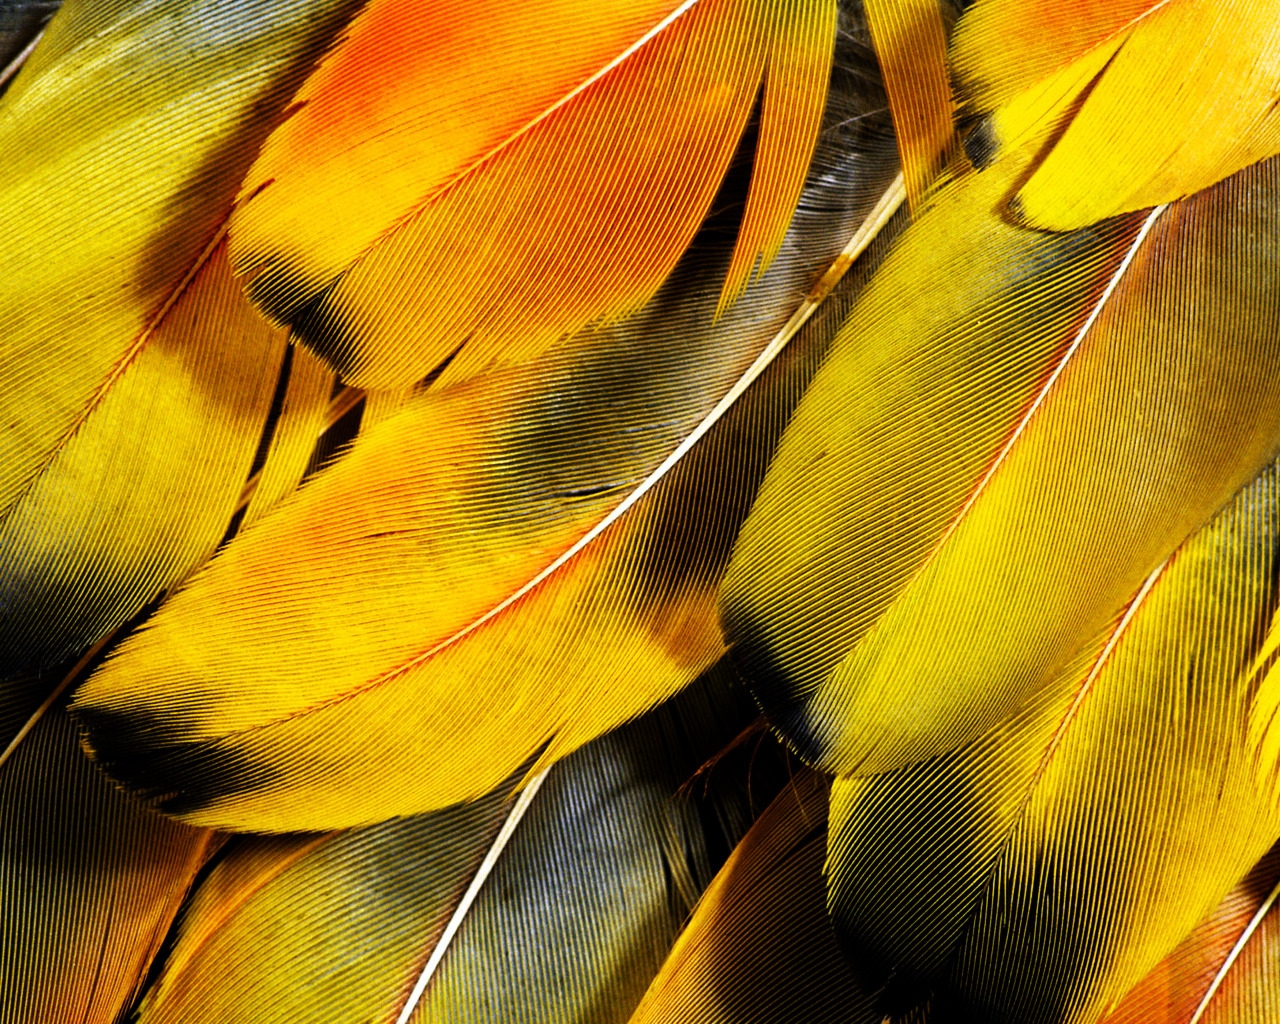 Feathers for 1280 x 1024 resolution